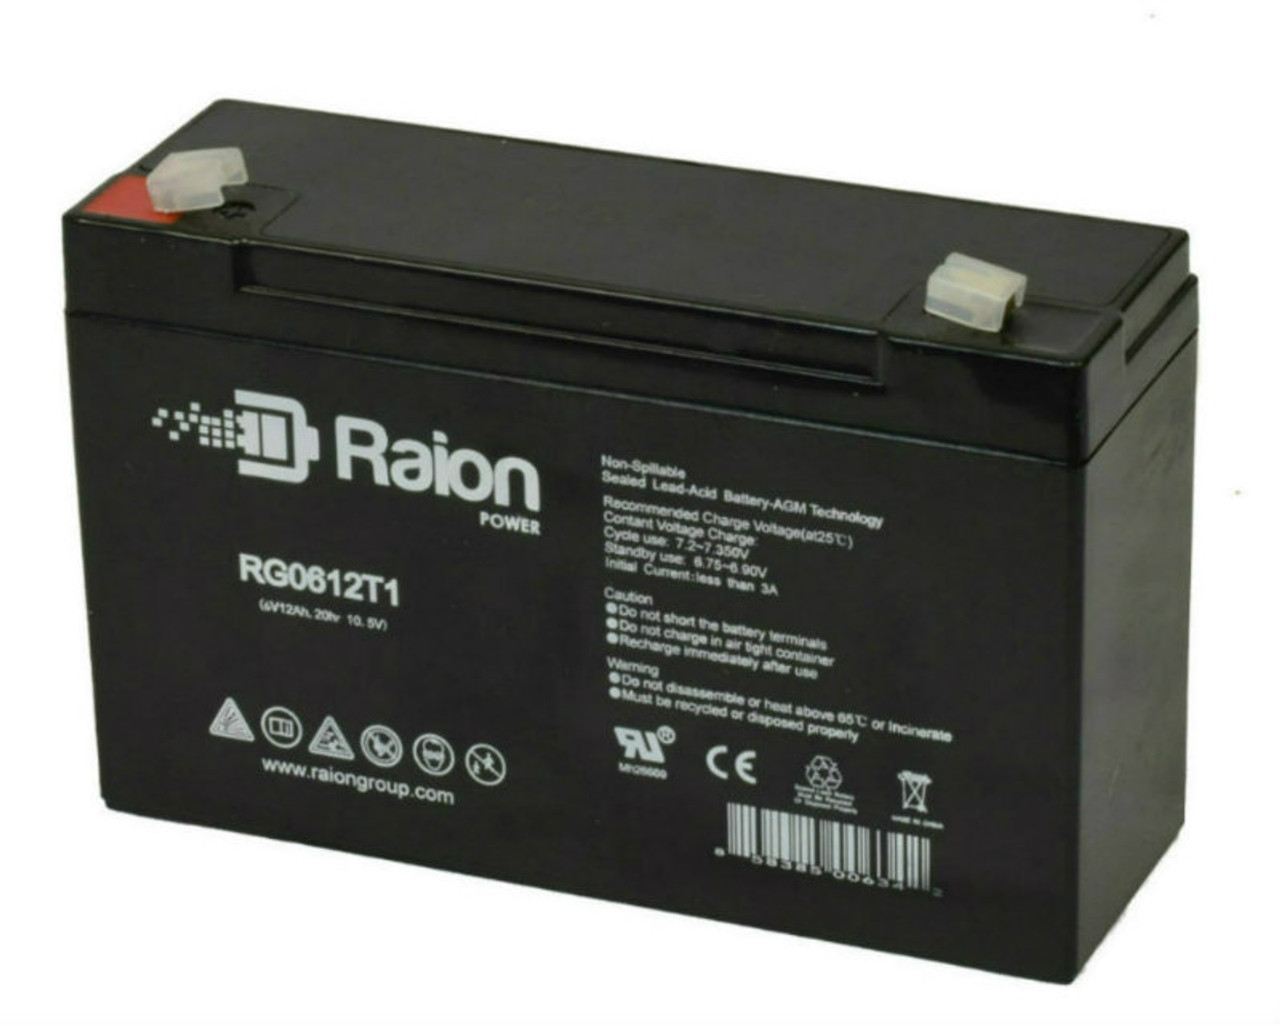 Raion Power RG06120T1 6V 12Ah Replacement UPS Battery Cartridge for MGE Pulsar 500